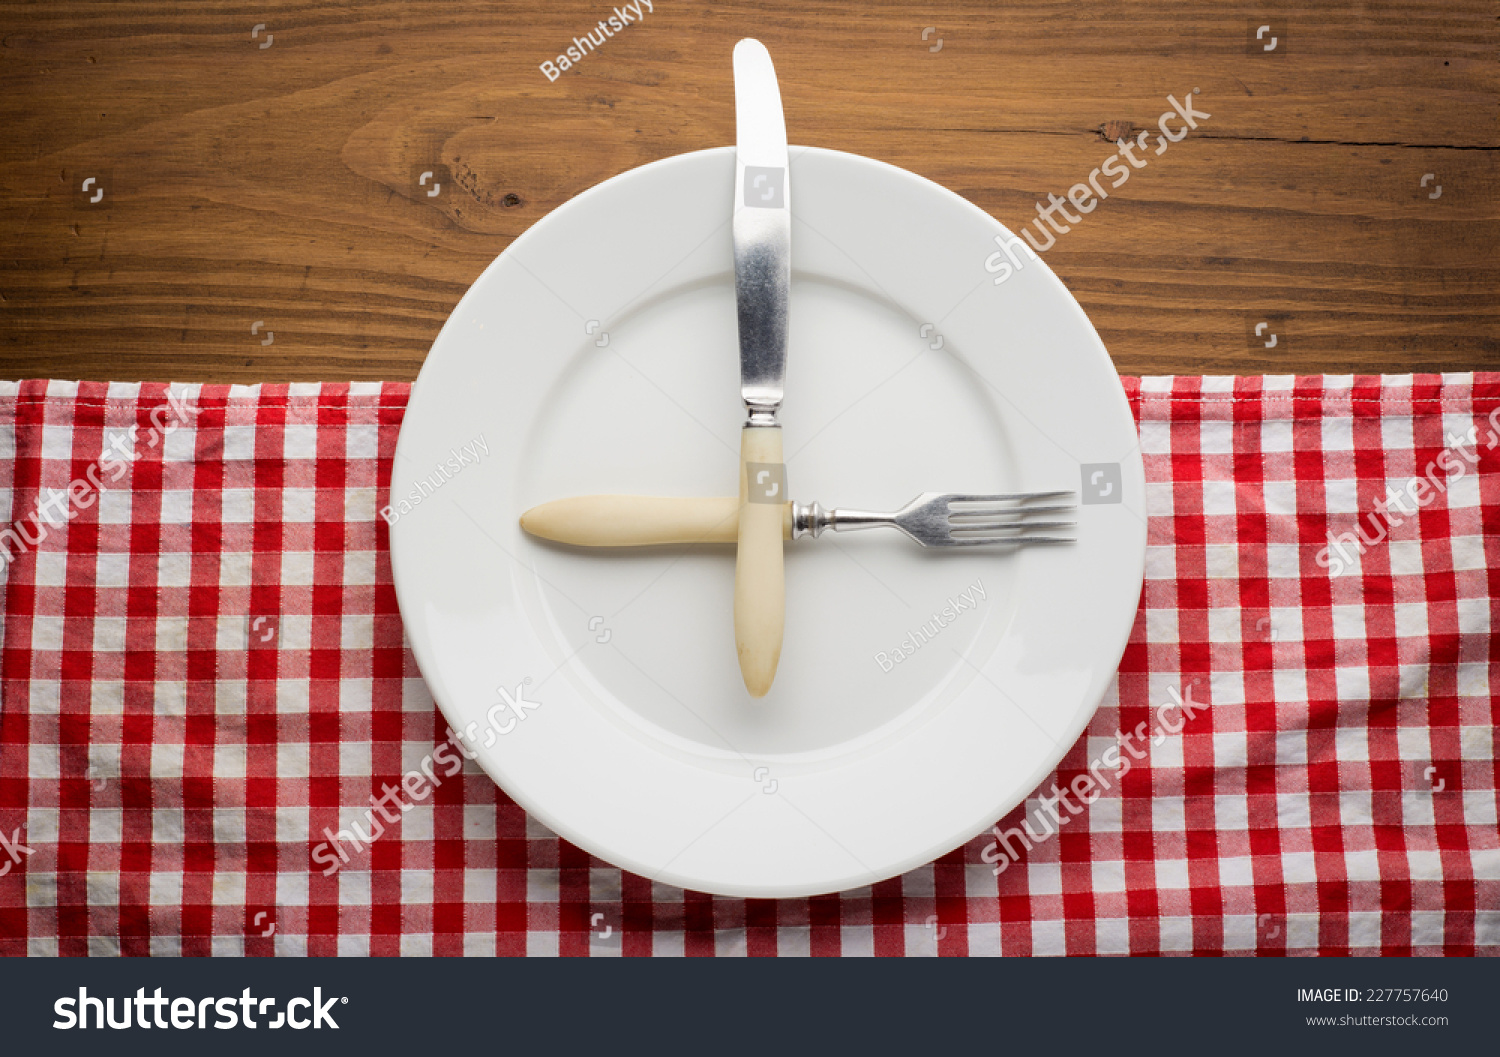 Empty plate with fork and knife on tablecloth over wooden background #227757640